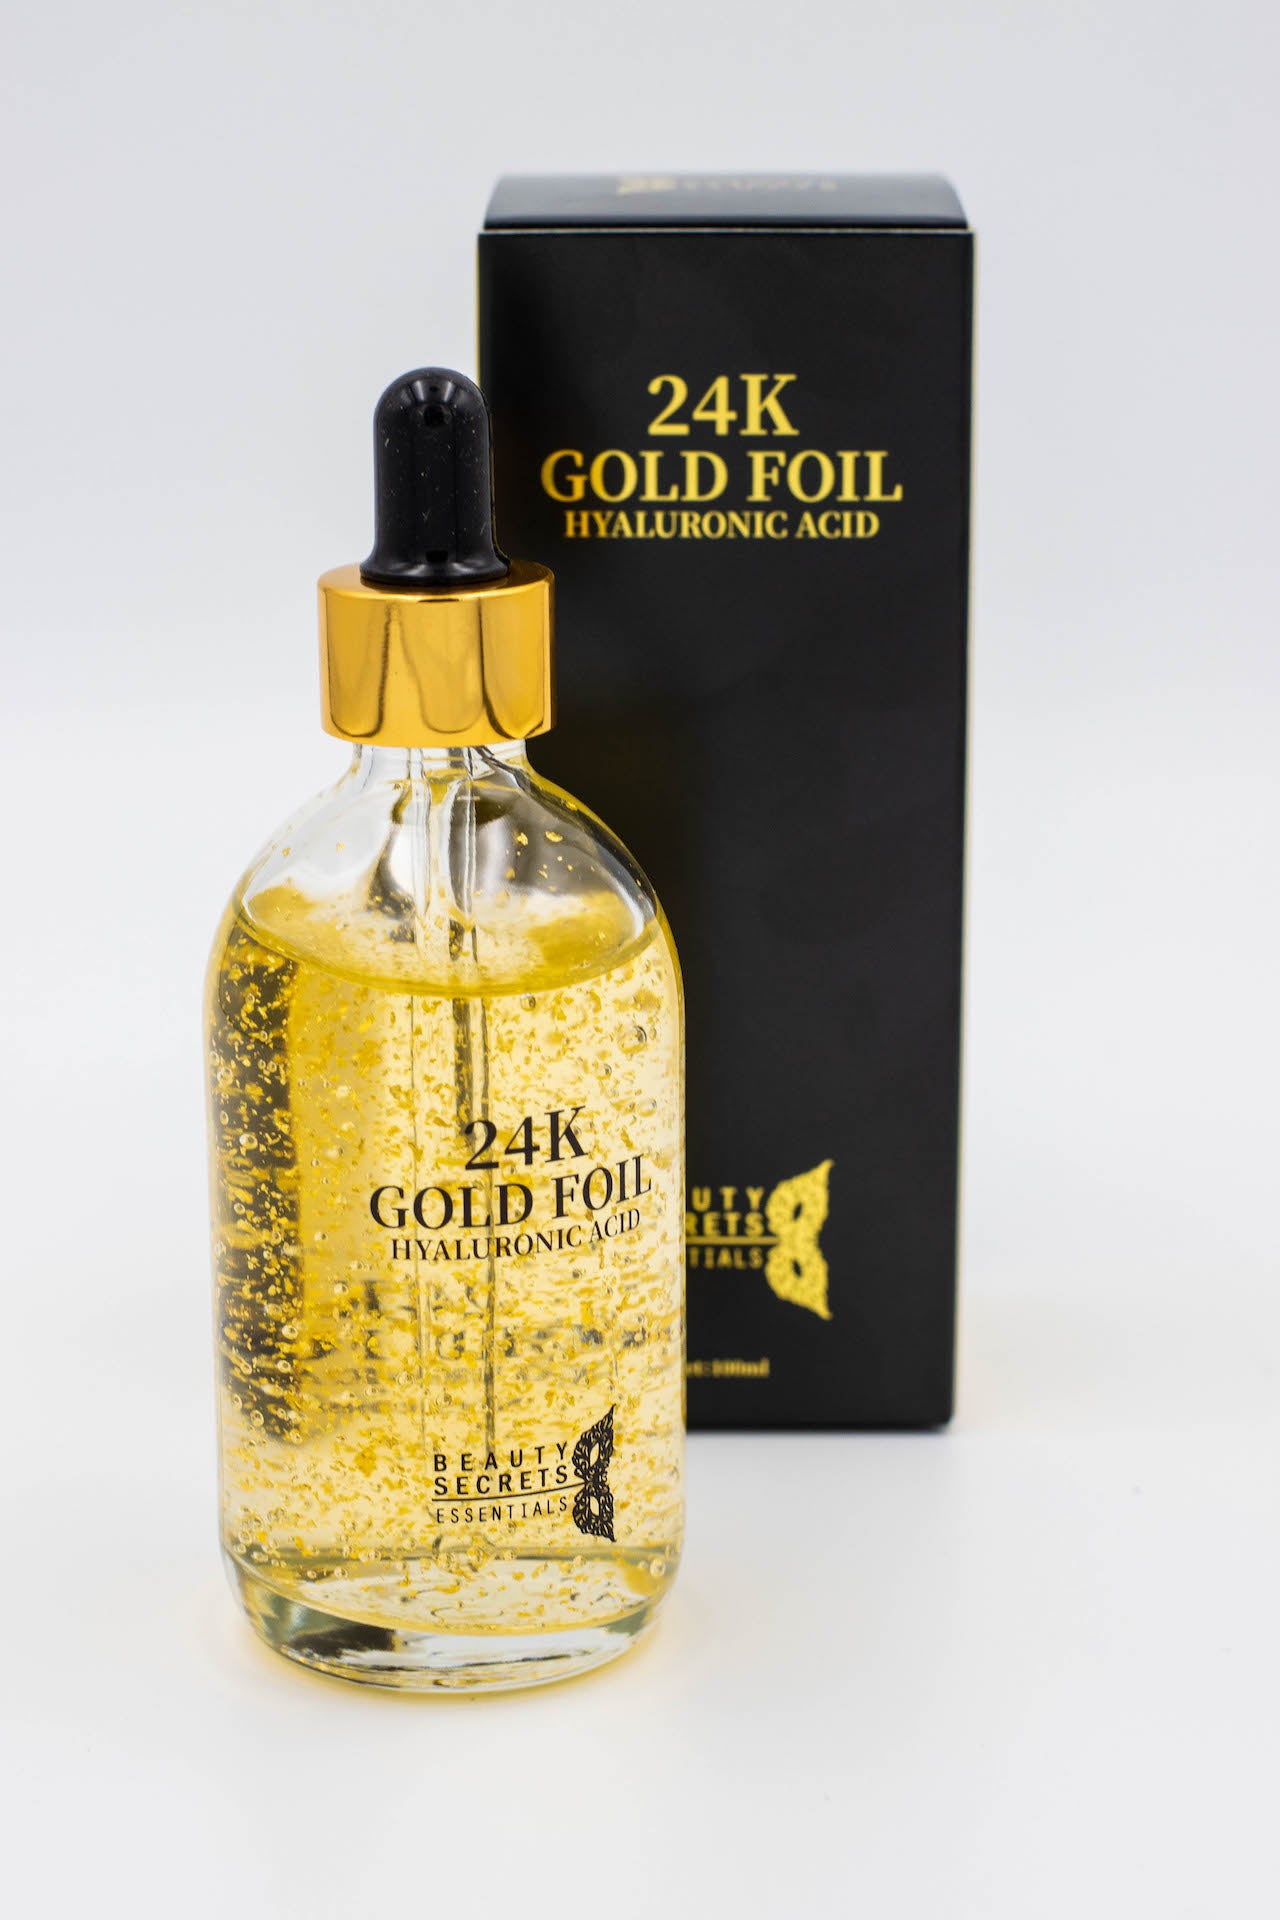 Luxurious gold colored liquid in a bottle and its box in white background that helps in hydration of your skin.